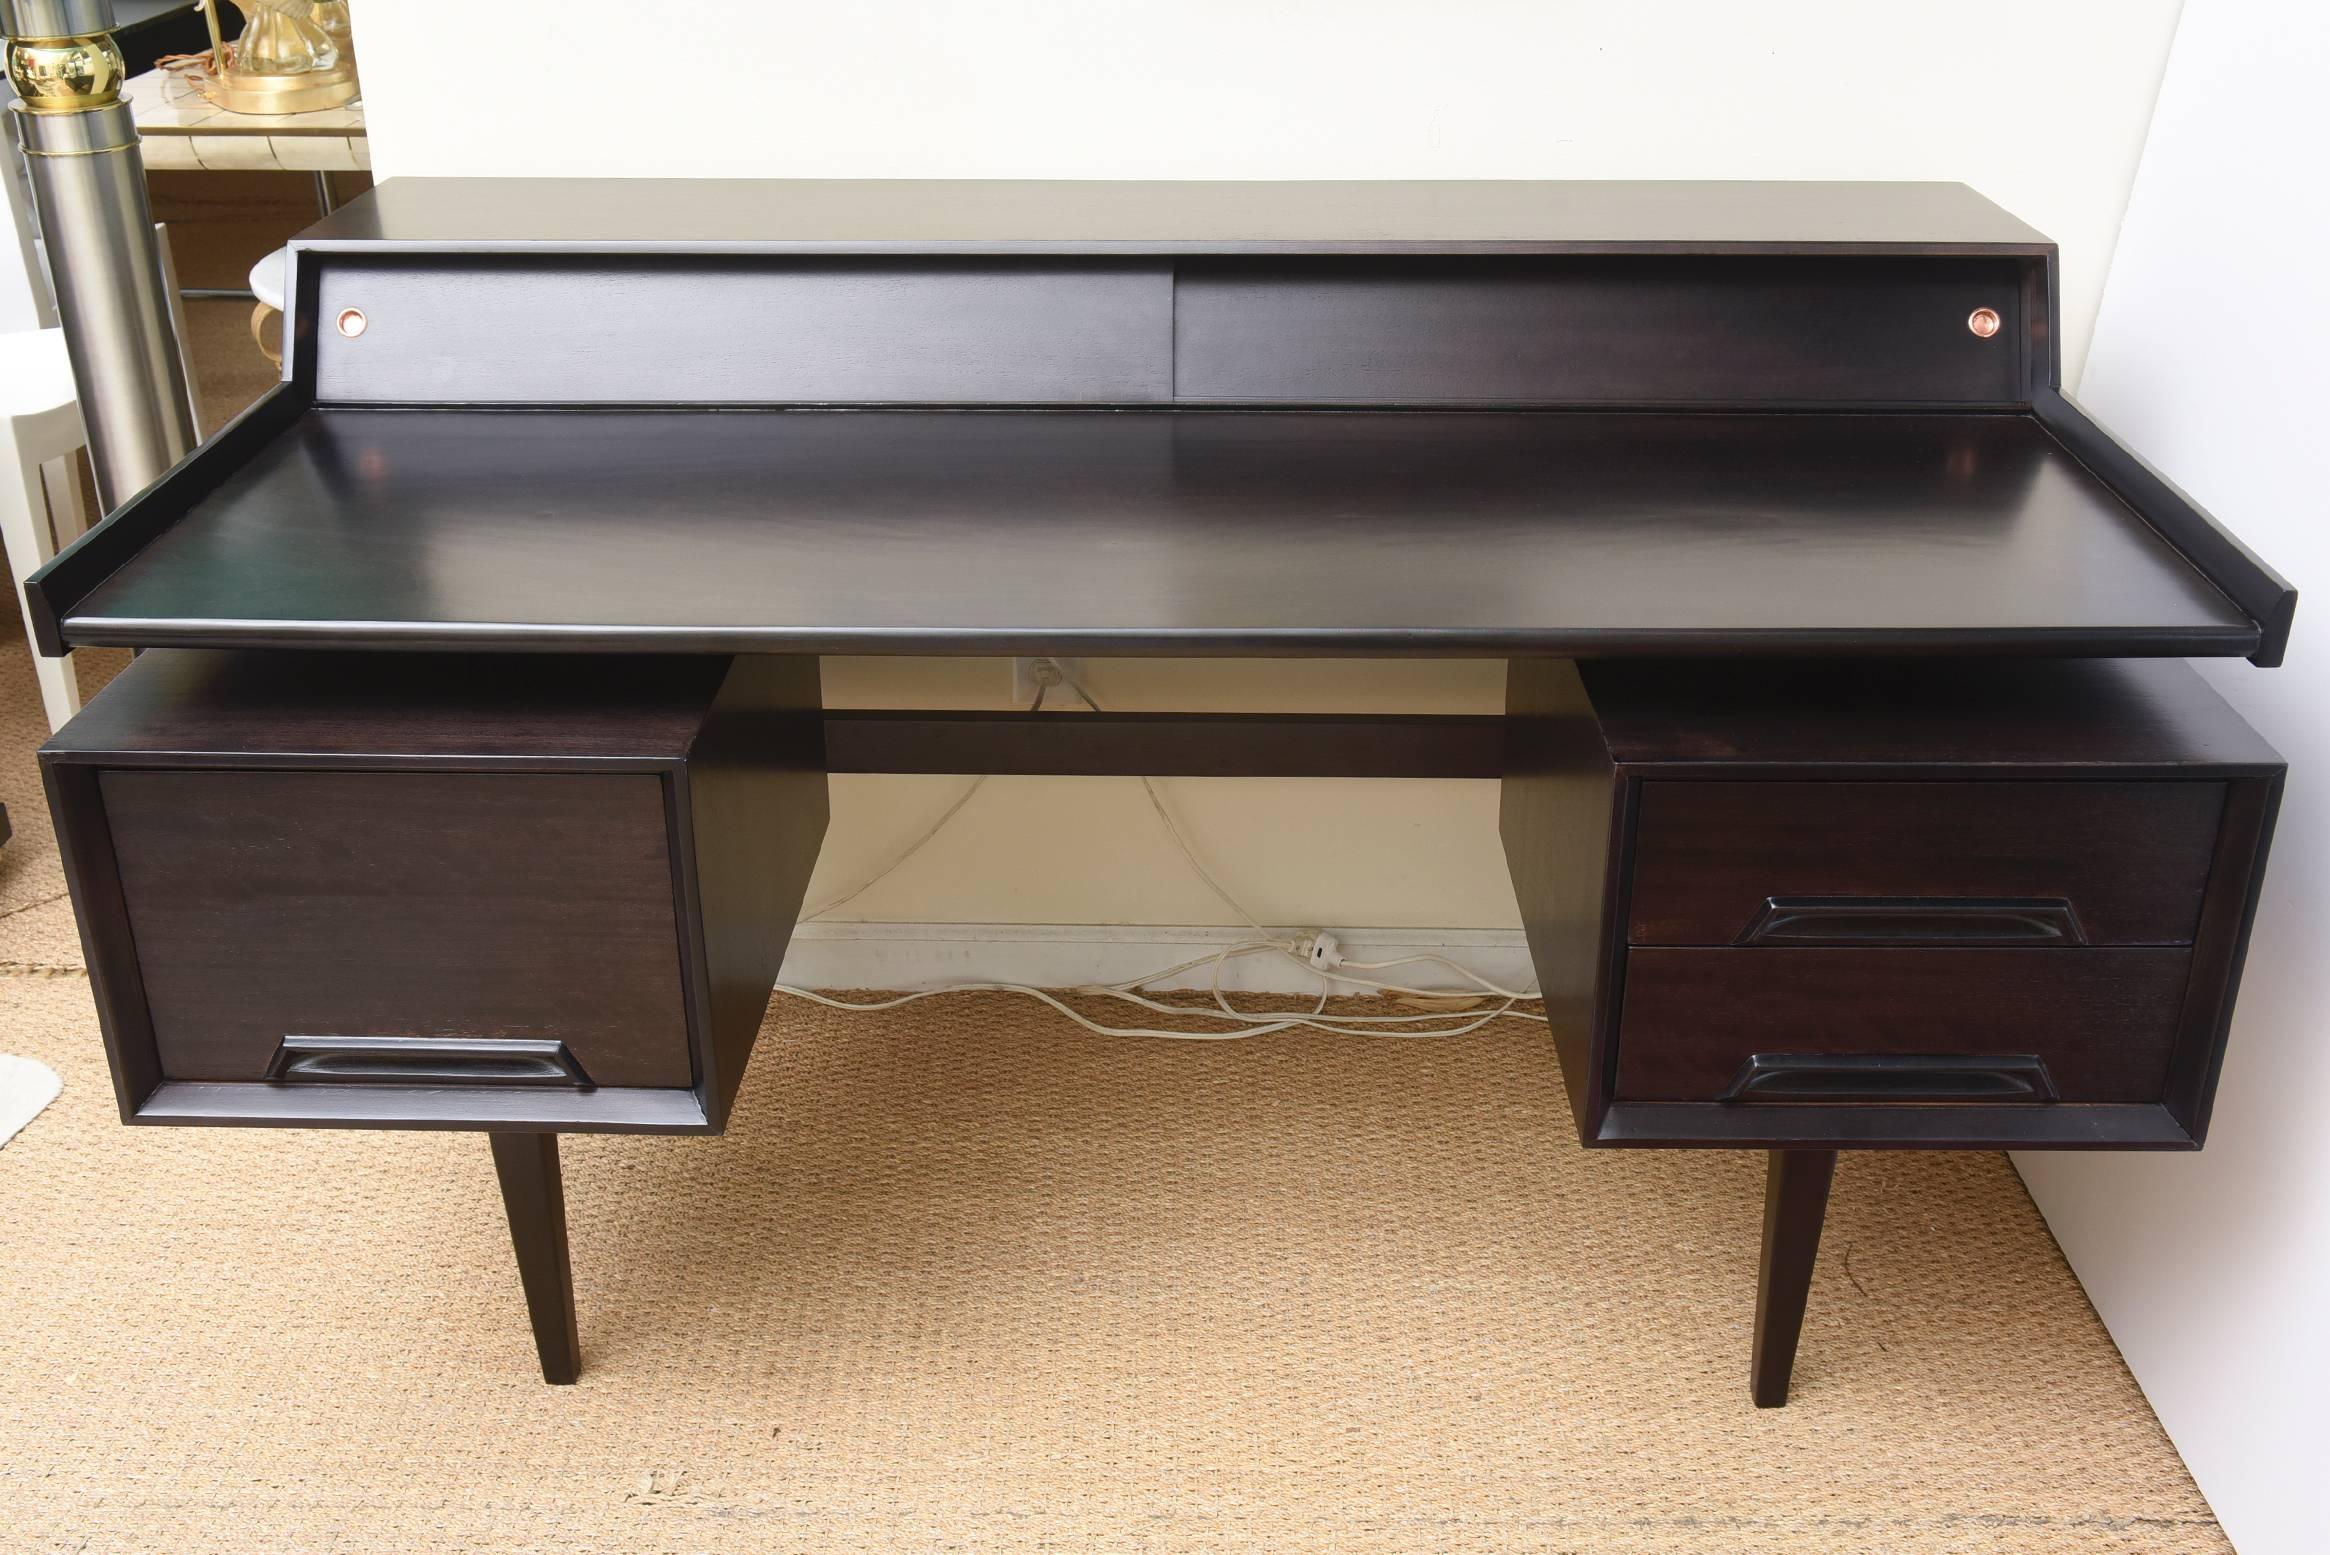 This fantastic Milo Baughman sculptural desk has been newly ebonized over mahogany. The top portion of the floating desk opens to little compartments for mail, desk accessories, envelopes with two original polished copper tabs.
This has great